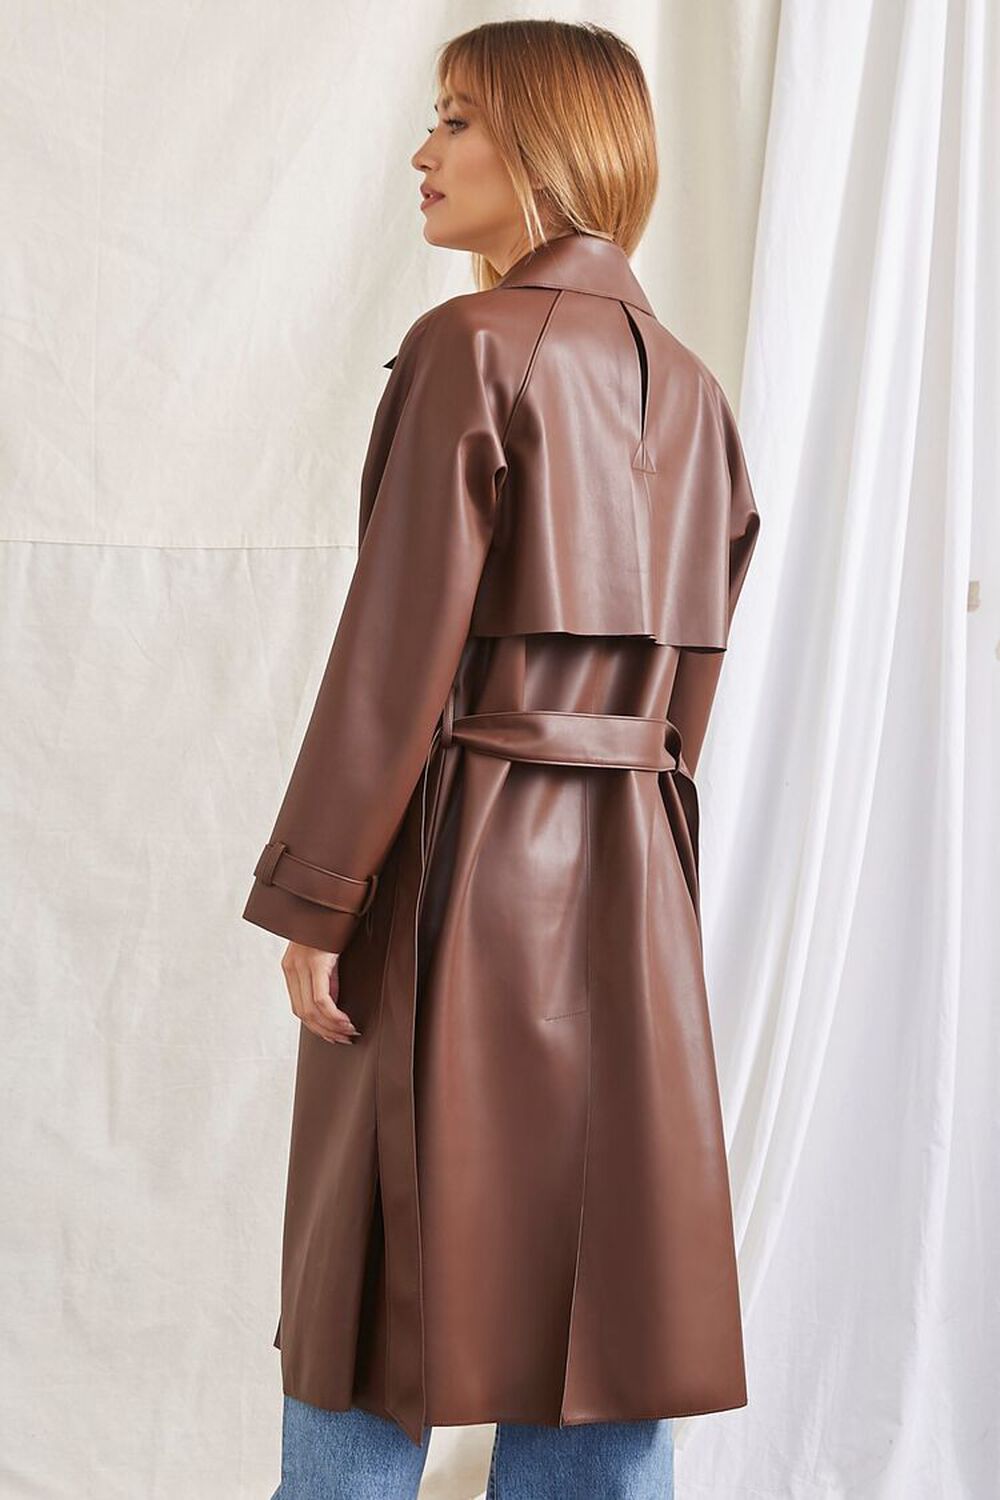 CHOCOLATE Belted Faux Leather Duster Jacket, image 3